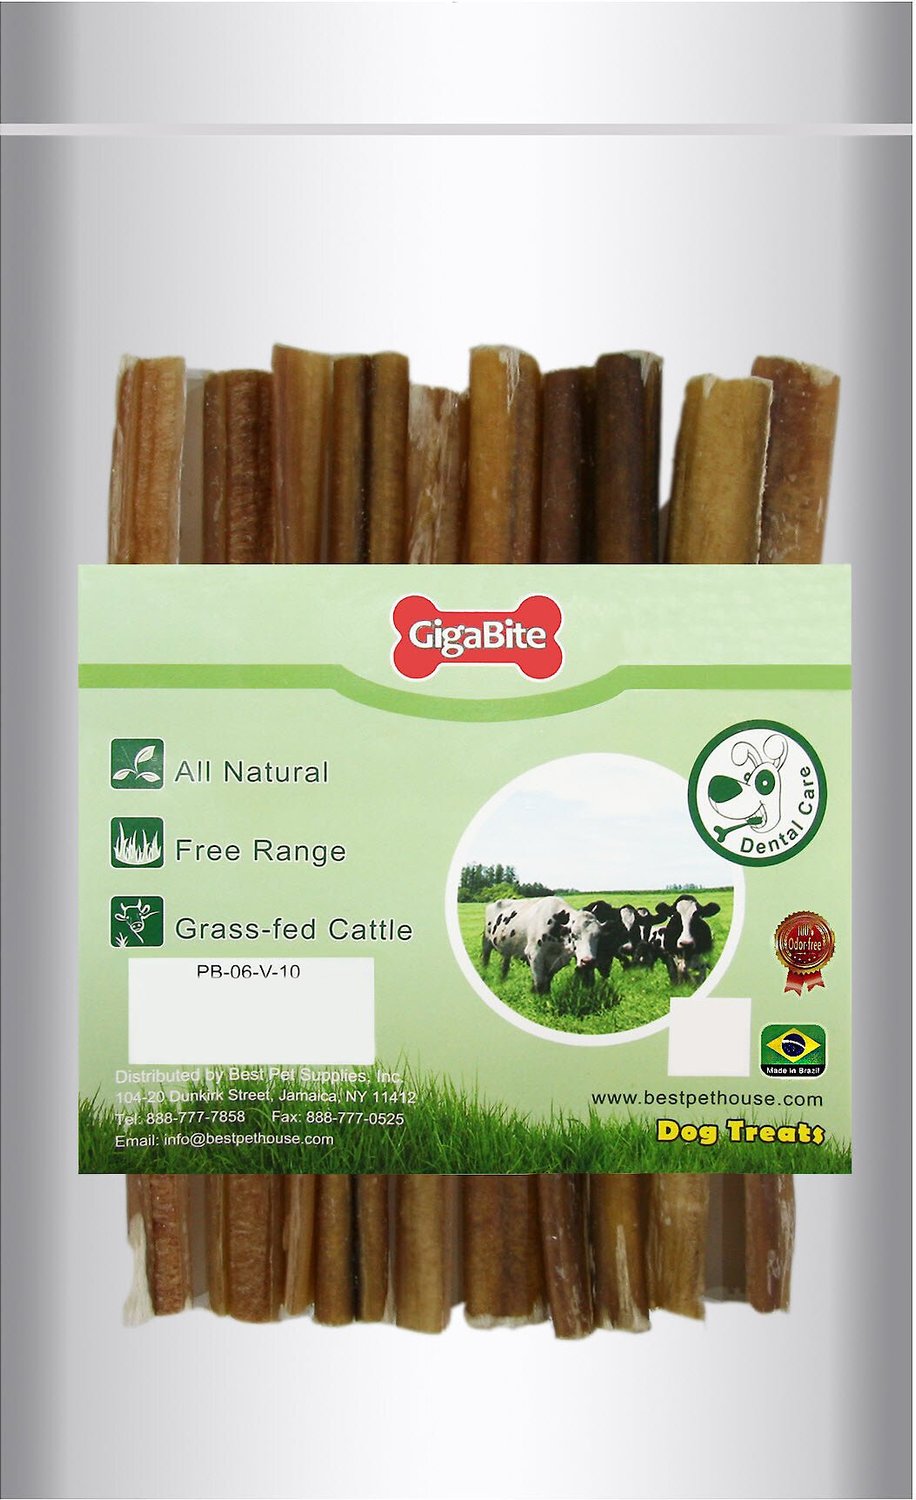 best rated bully sticks